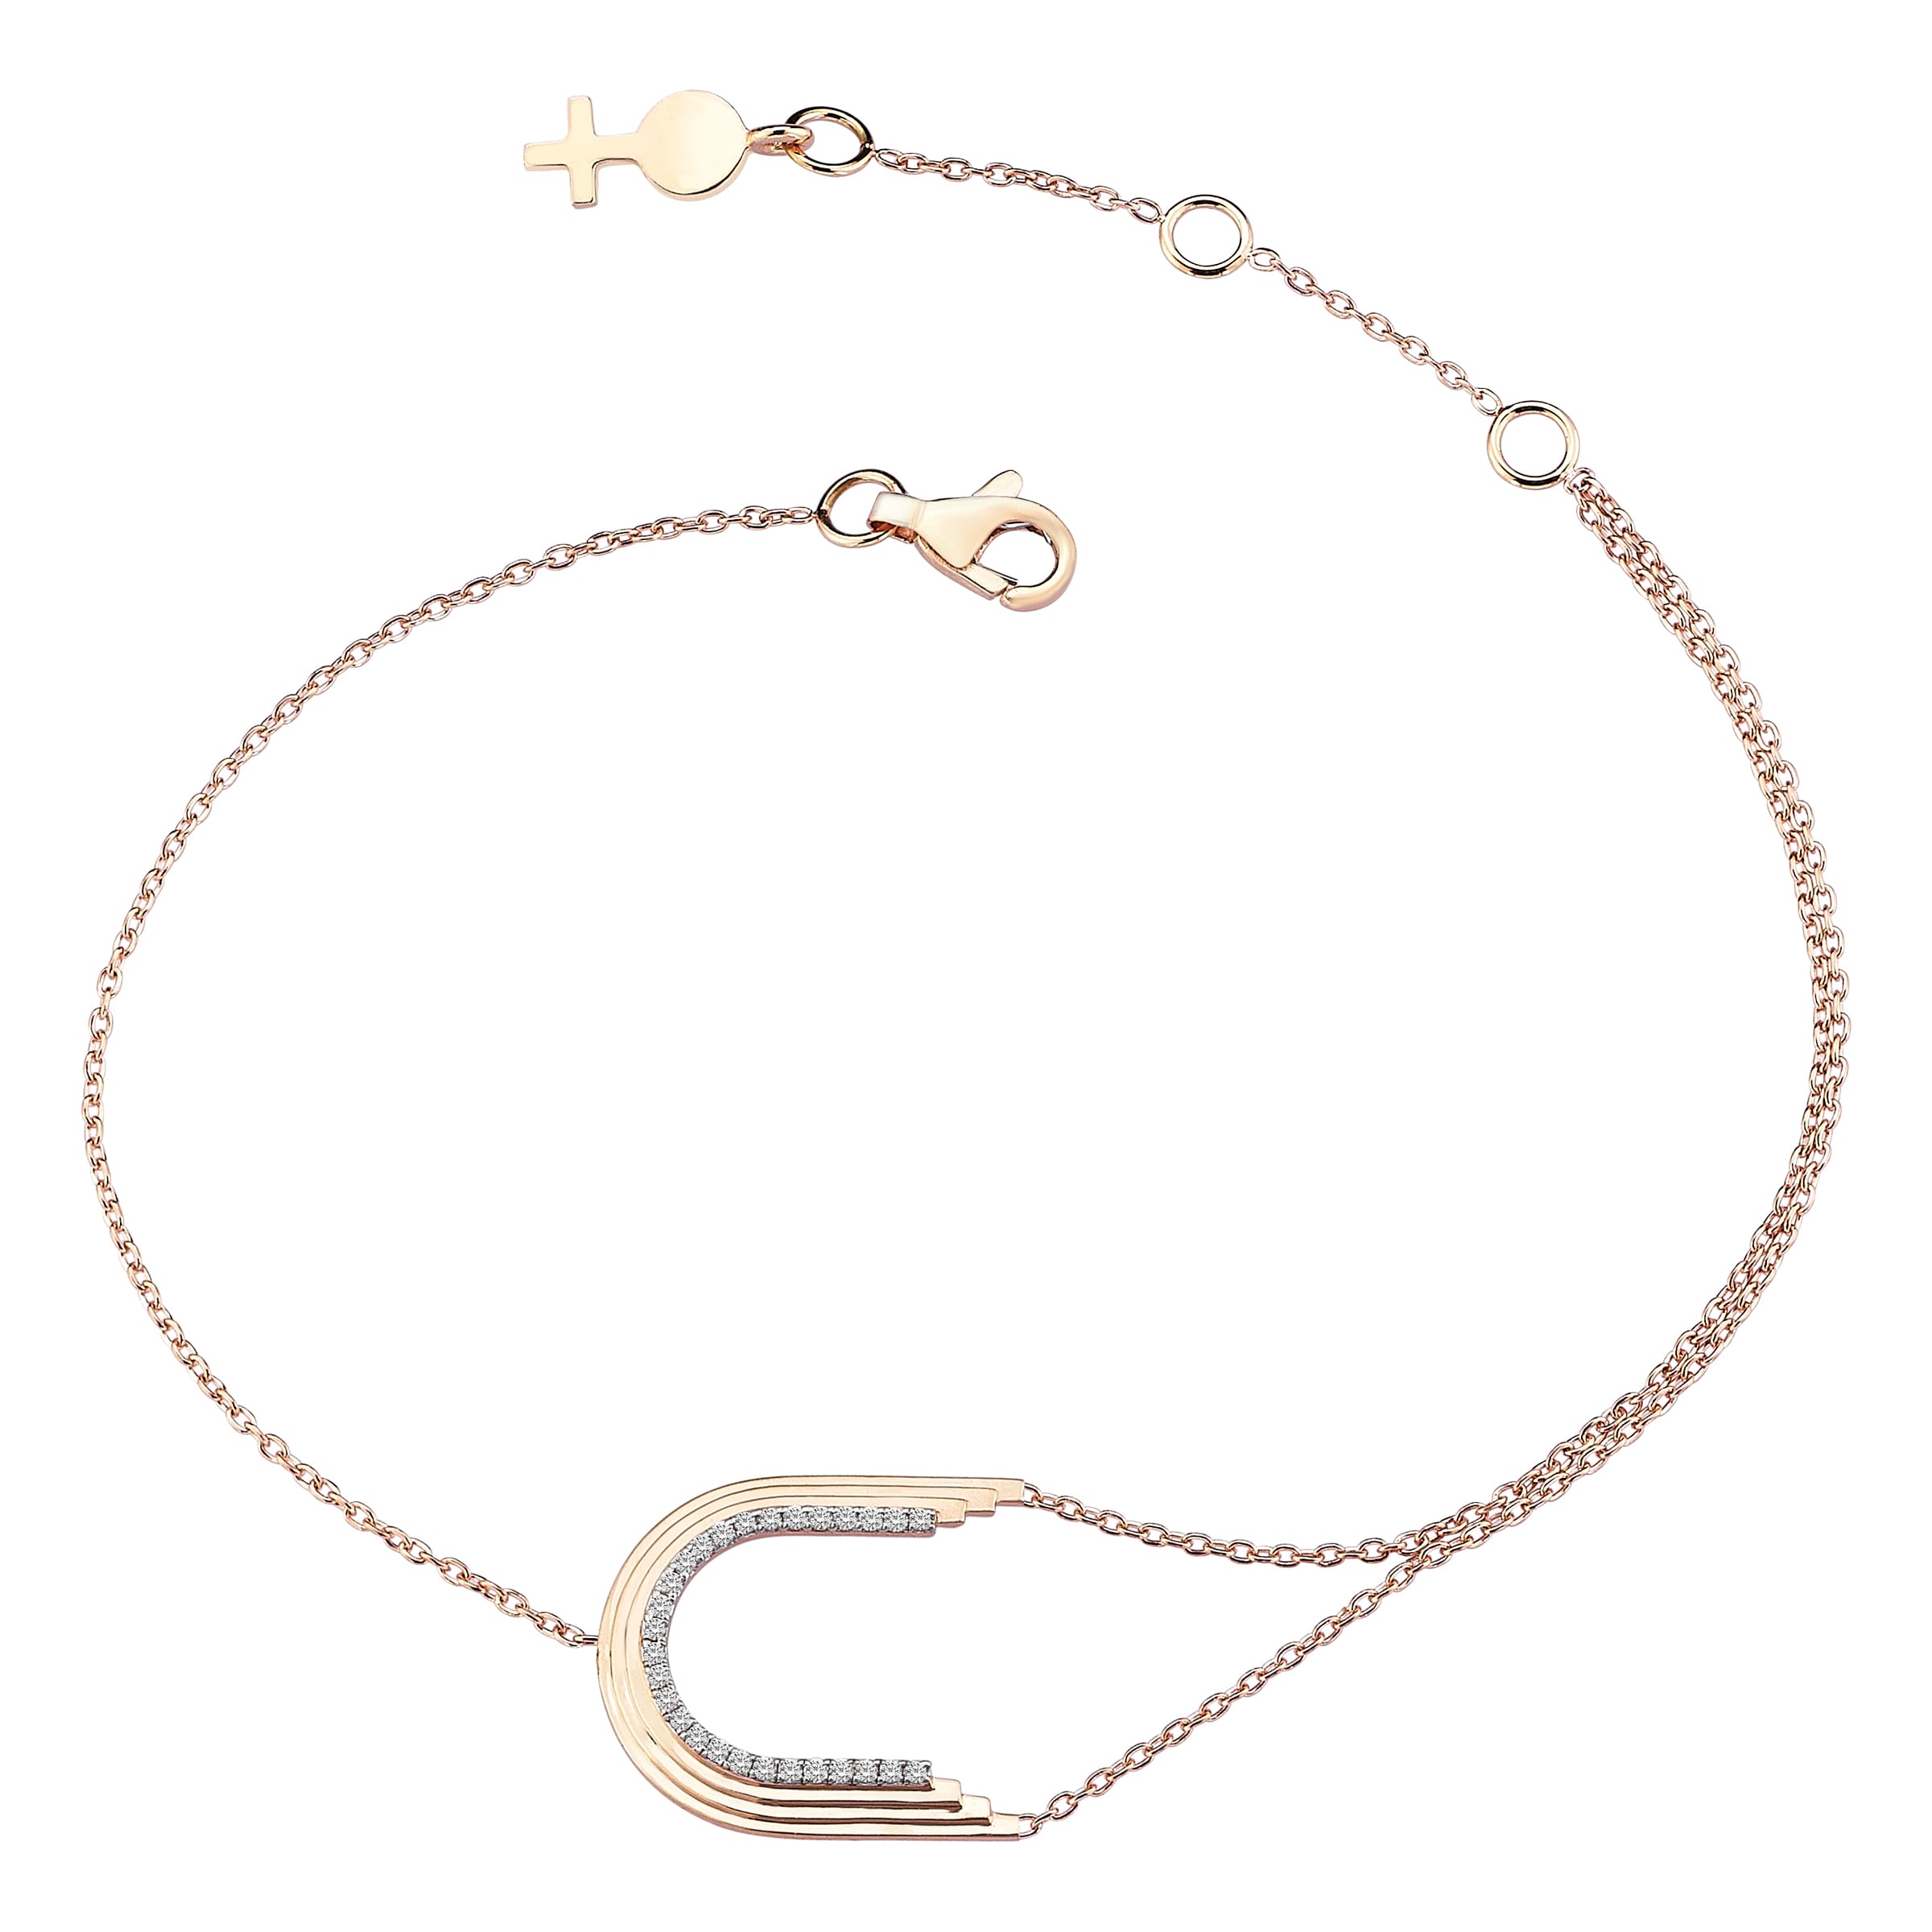 Concave Arch Bracelet in Rose Gold - Her Story Shop